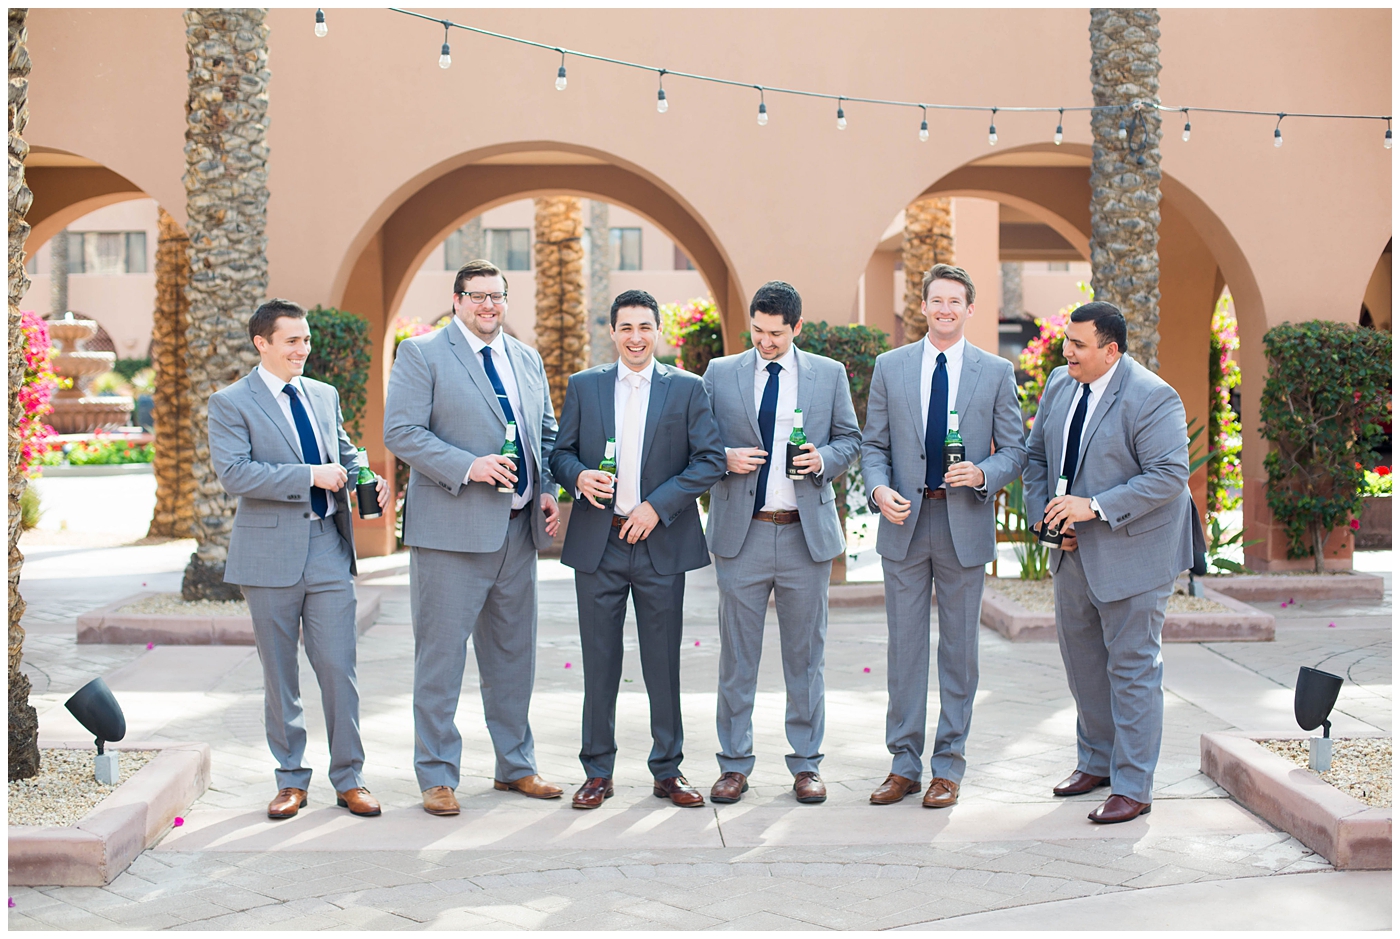 groom in gray suit with pink tie with groomsmen with navy ties getting ready on wedding day